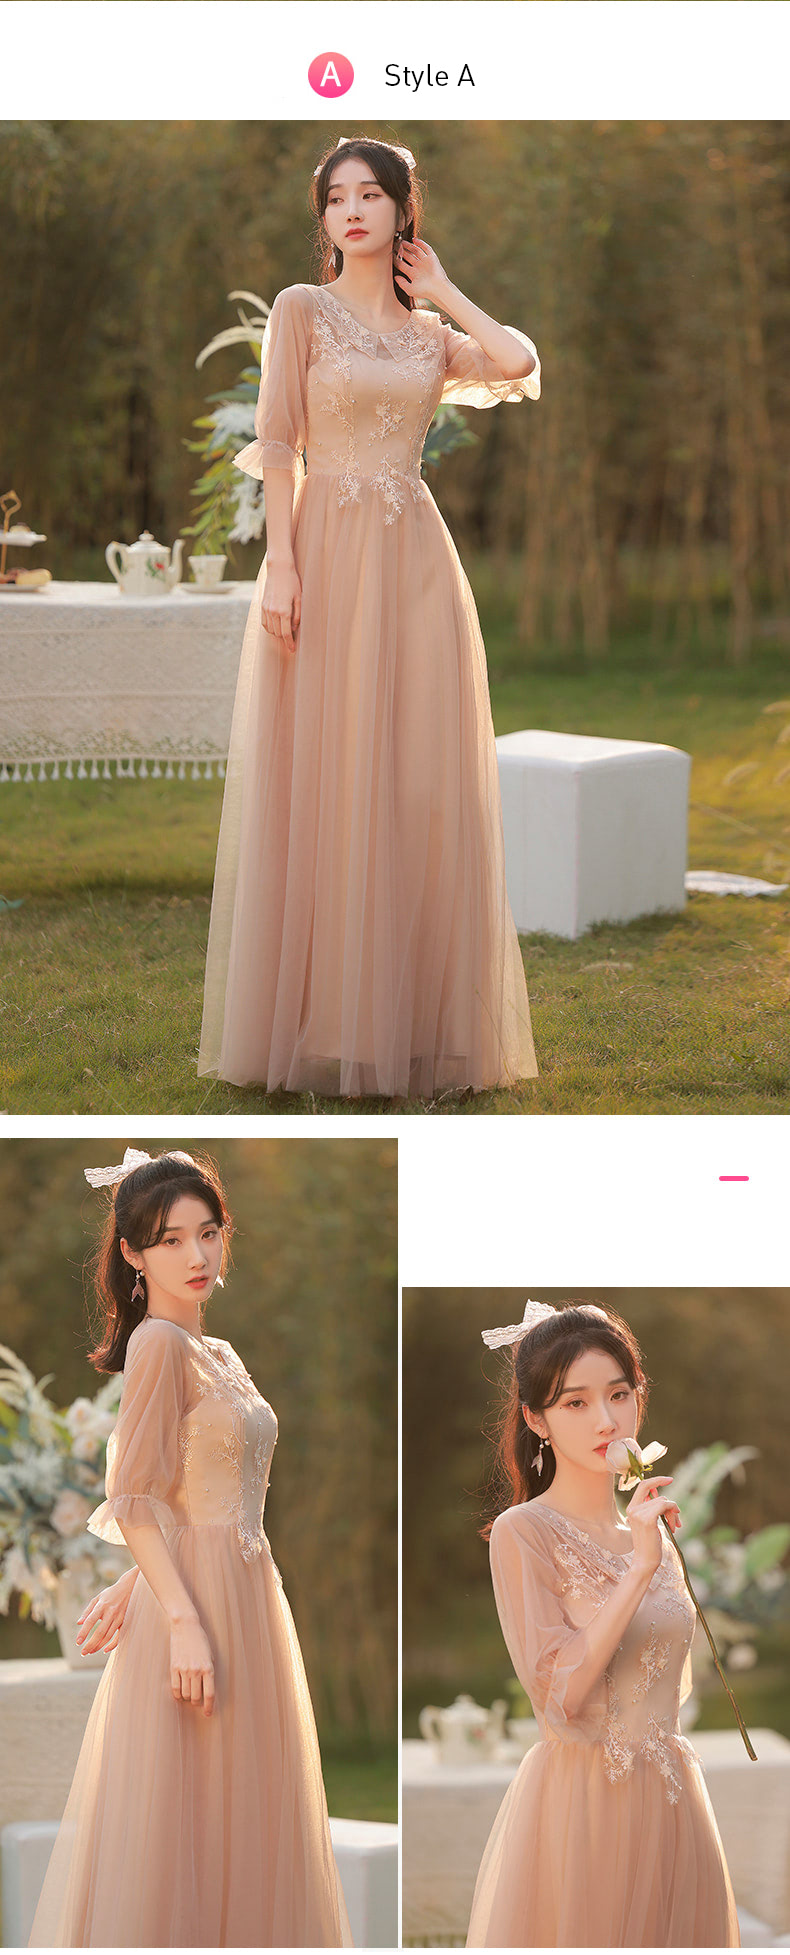 A-Line-Champagne-Wedding-Guest-Bridesmaid-Dress-Casual-Gown16.jpg